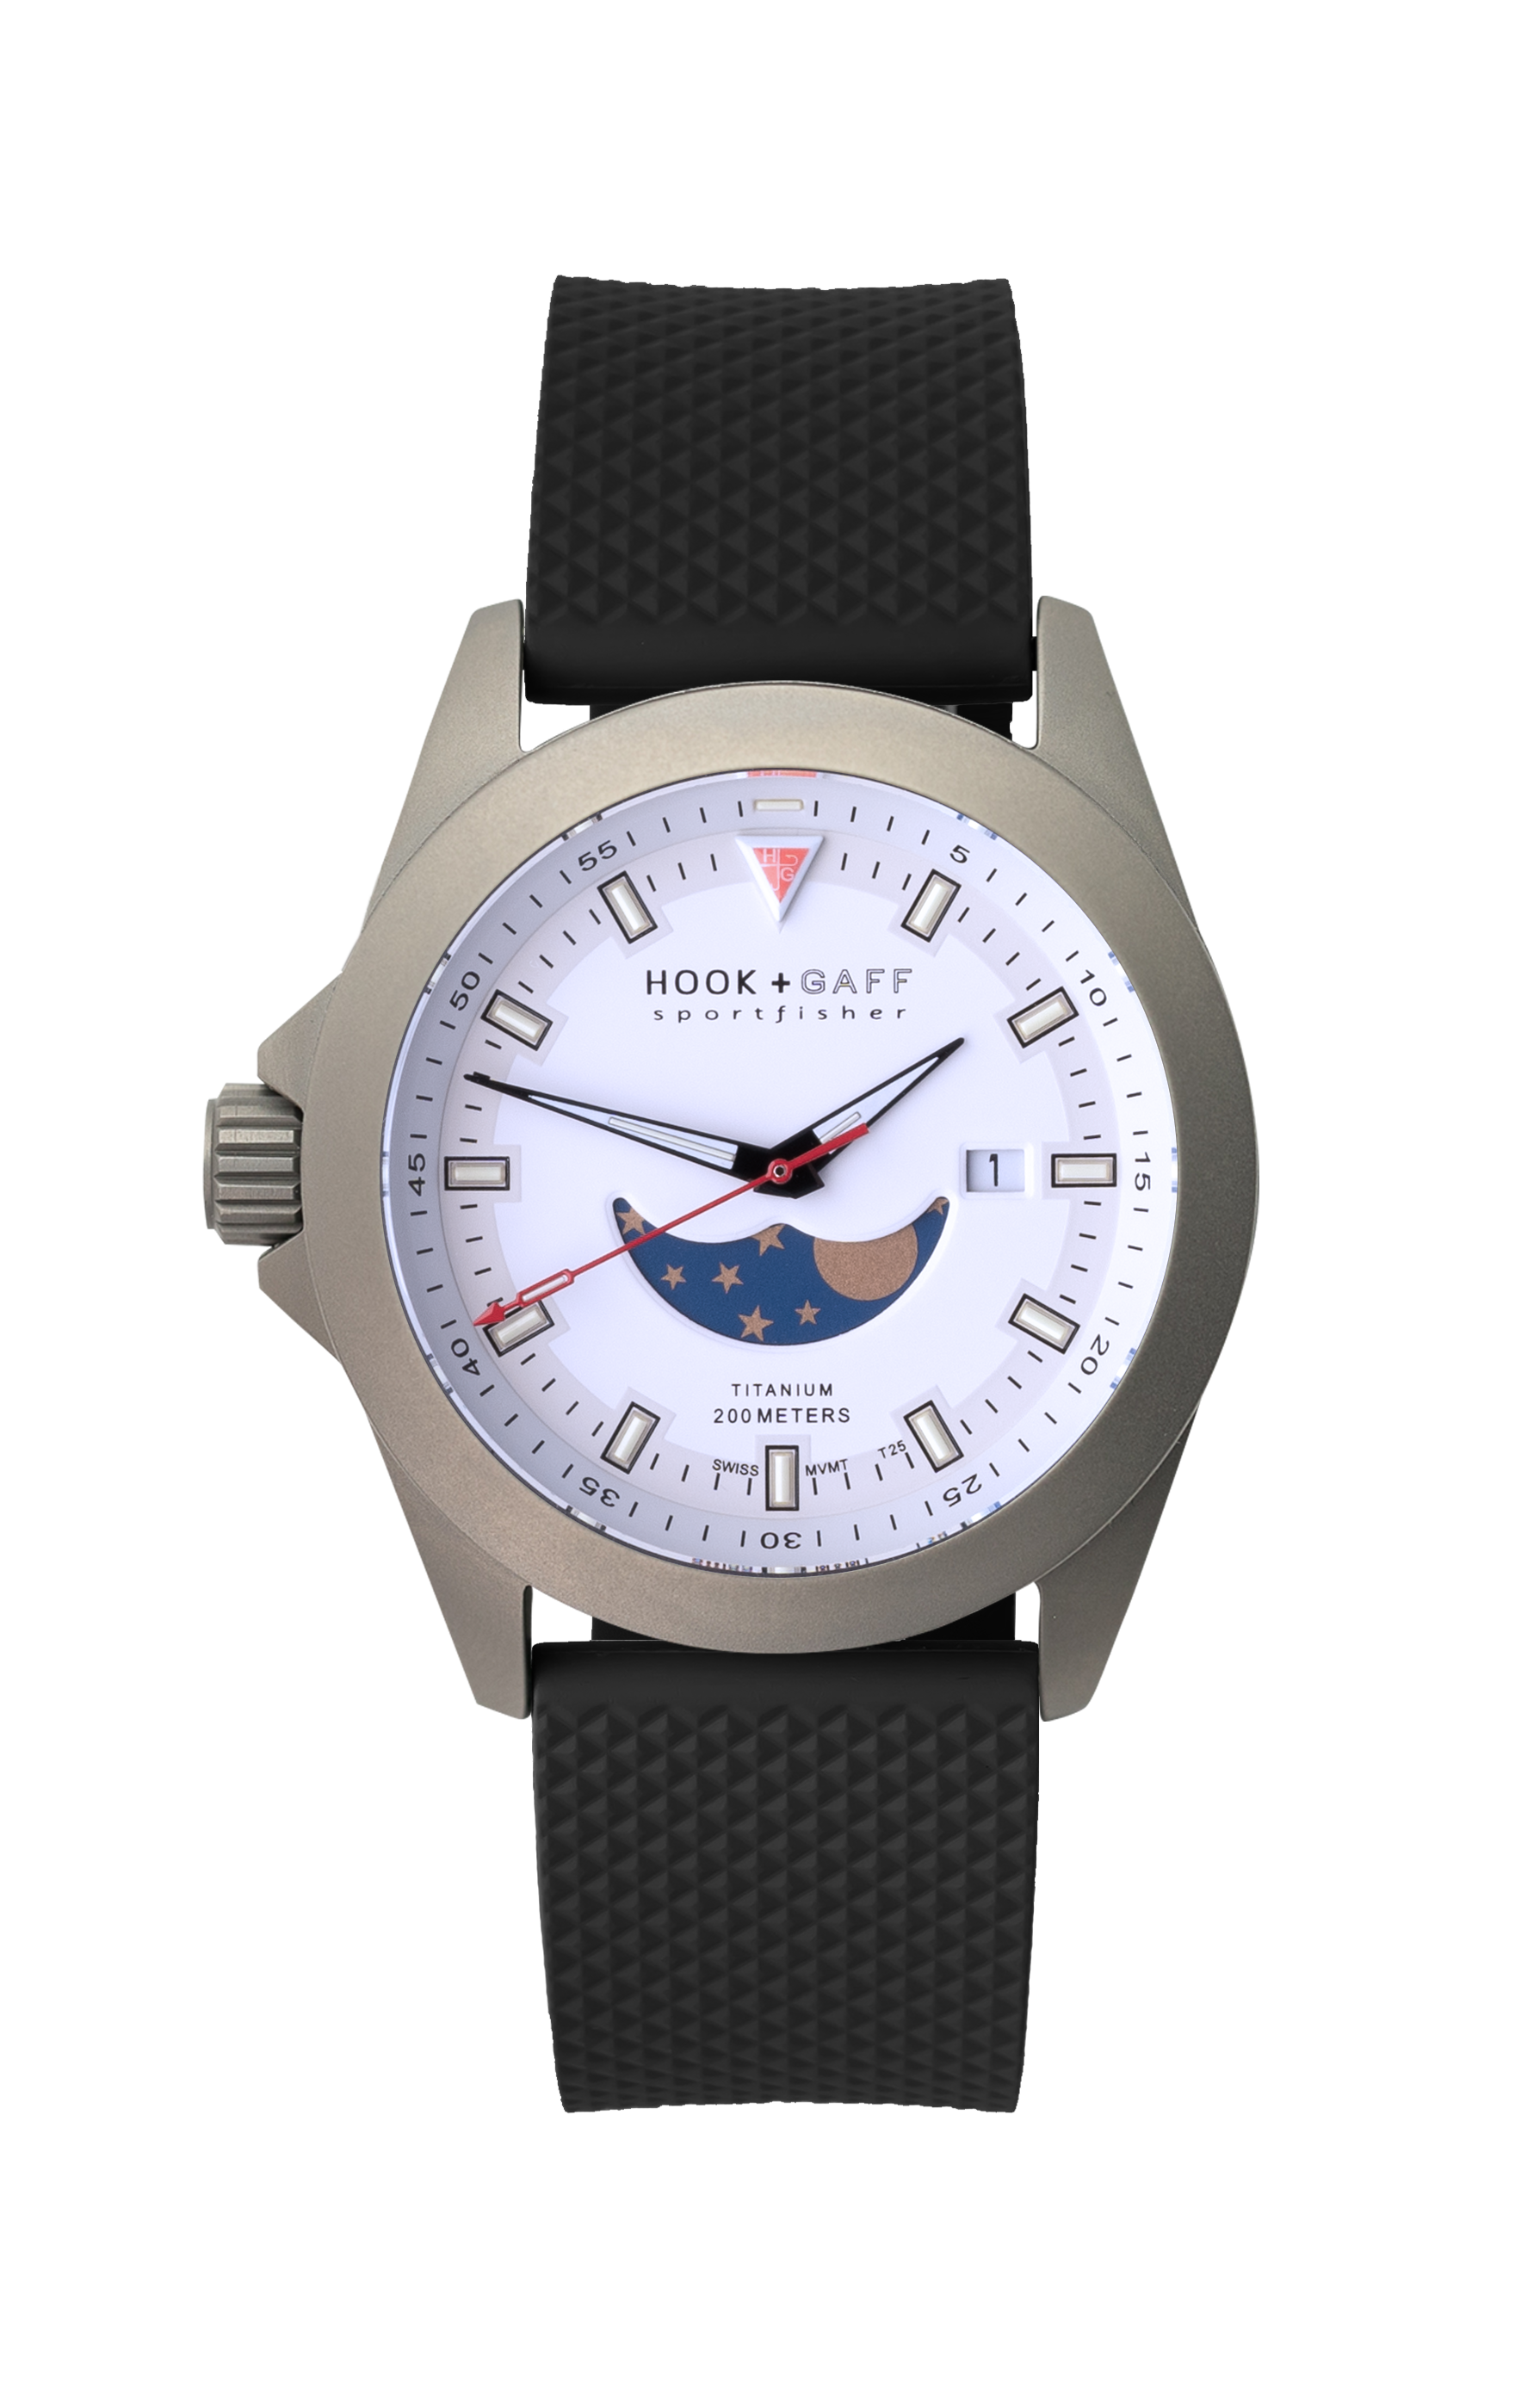 Sportfisher Moonphase - White Dial Gray Dive / White Moonphase Dial